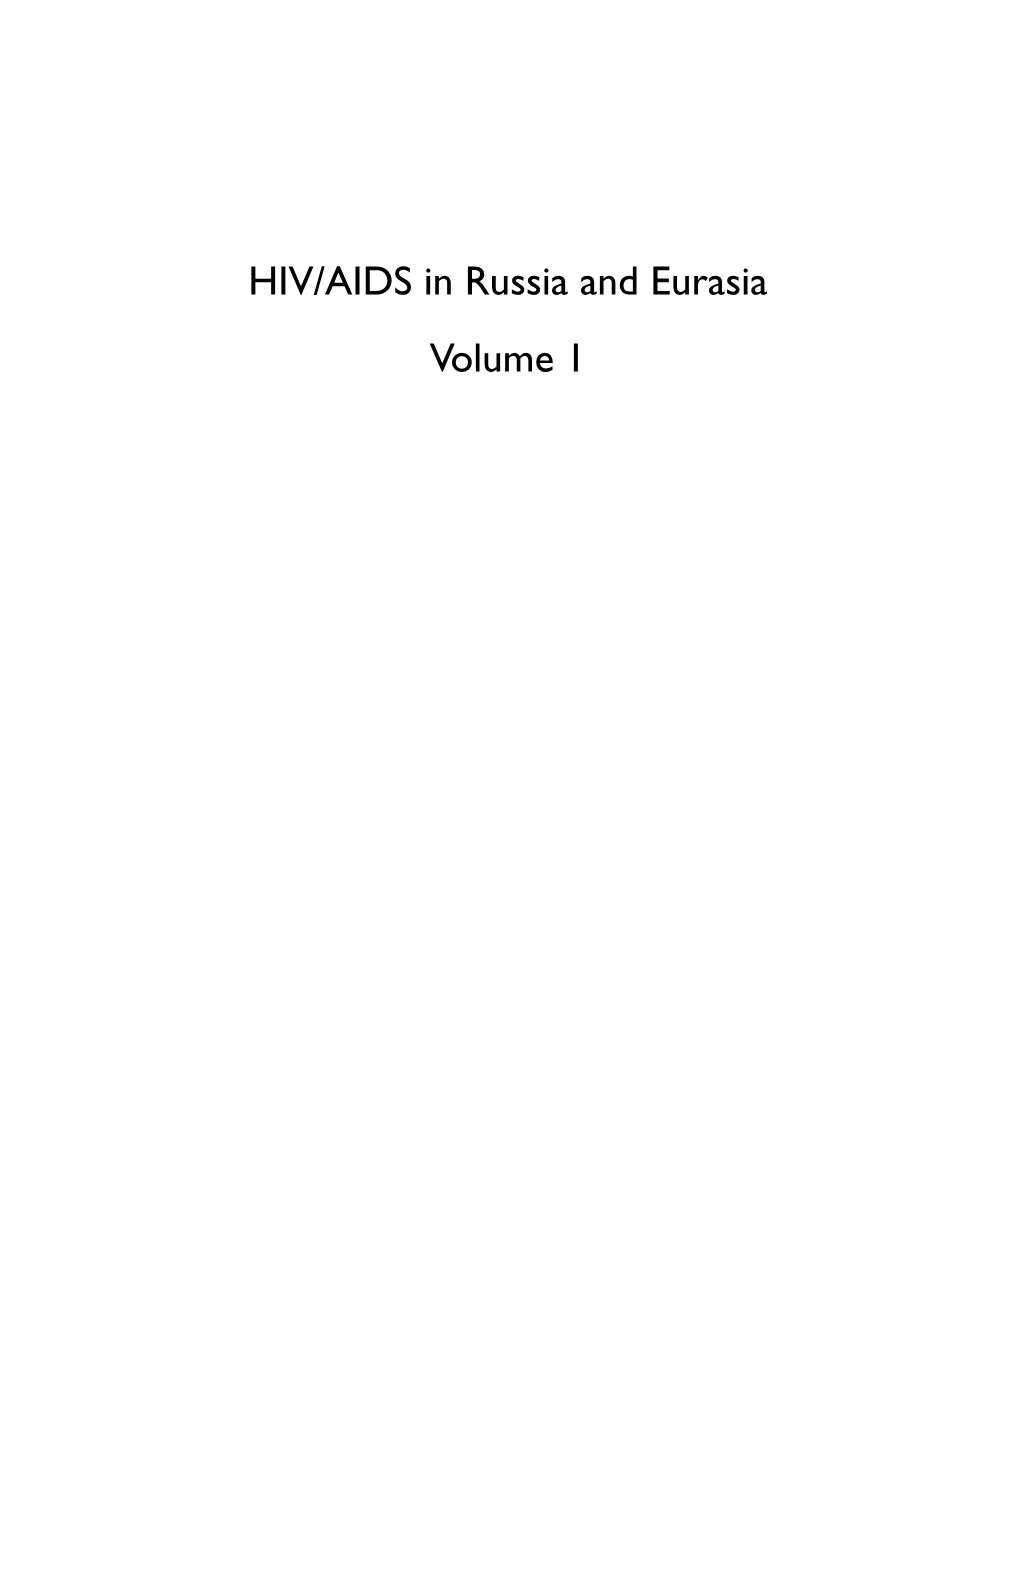 HIV/AIDS in Russia and Eurasia Volume 1 This Page Intentionally Left Blank HIV/AIDS in Russia and Eurasia Volume 1